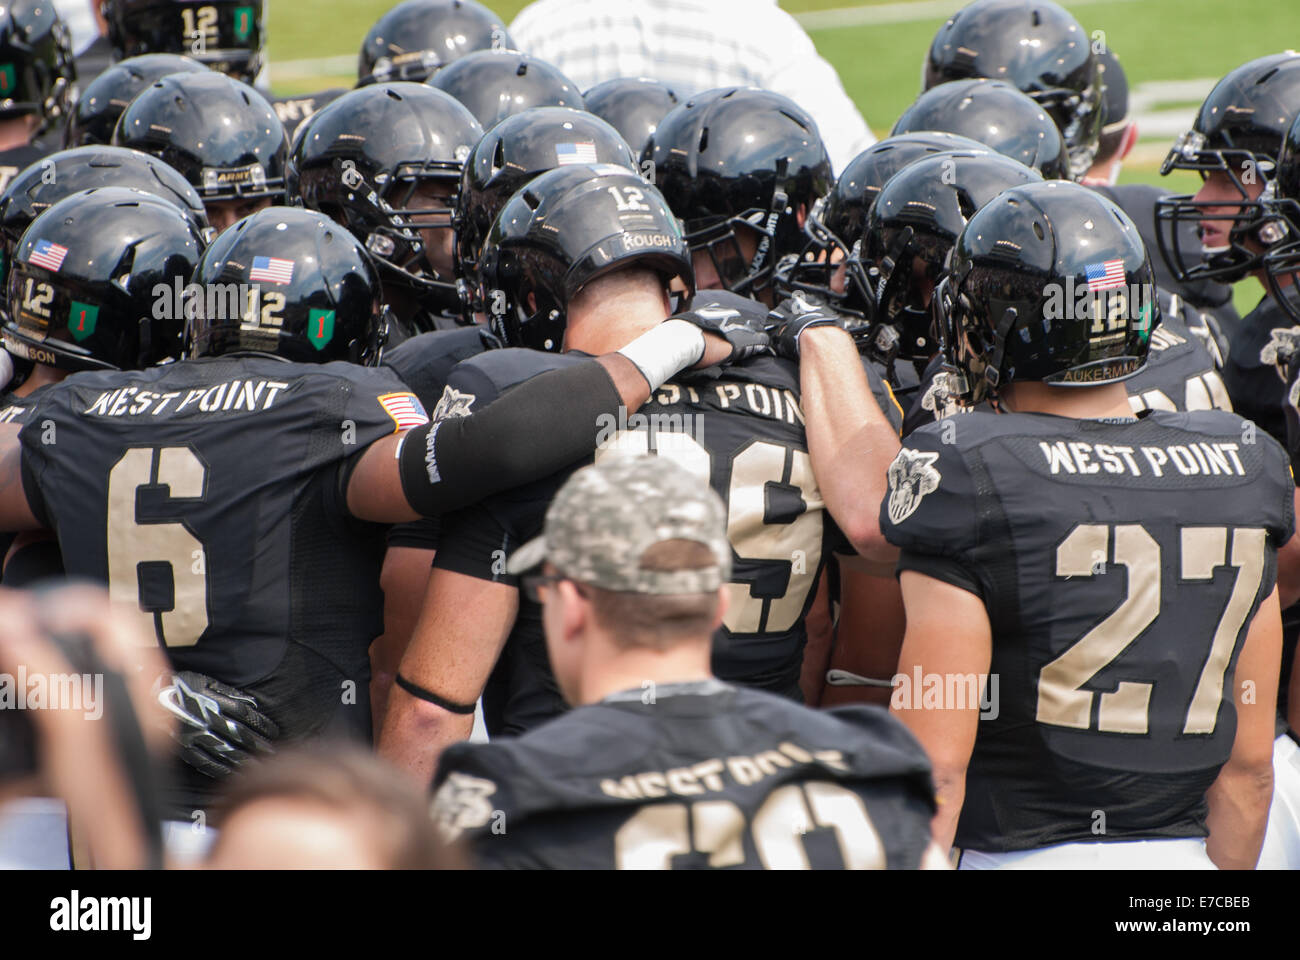 A United States Military Academy football game played at Mitchie Stadium at West Point, NY Stock Photo